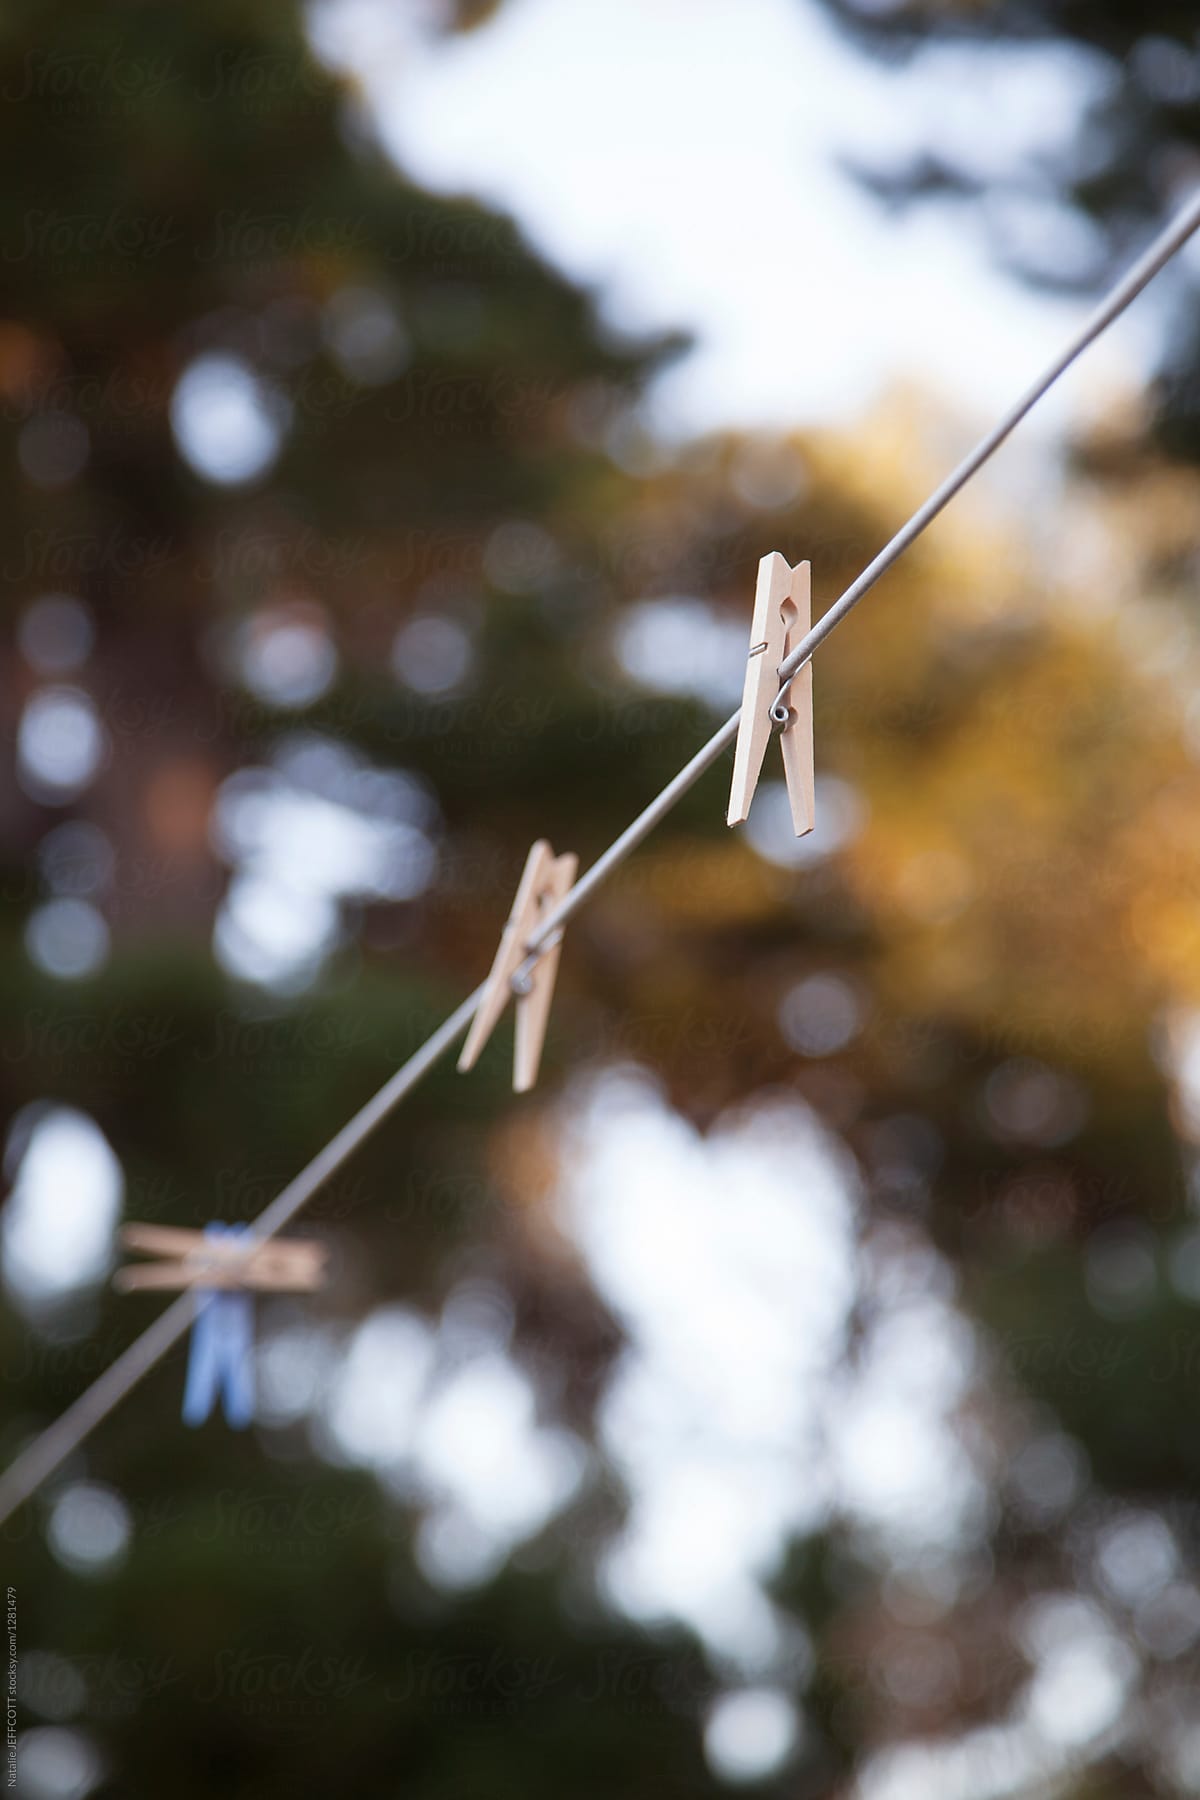 wooden pegs on clothesline at sunset with trees